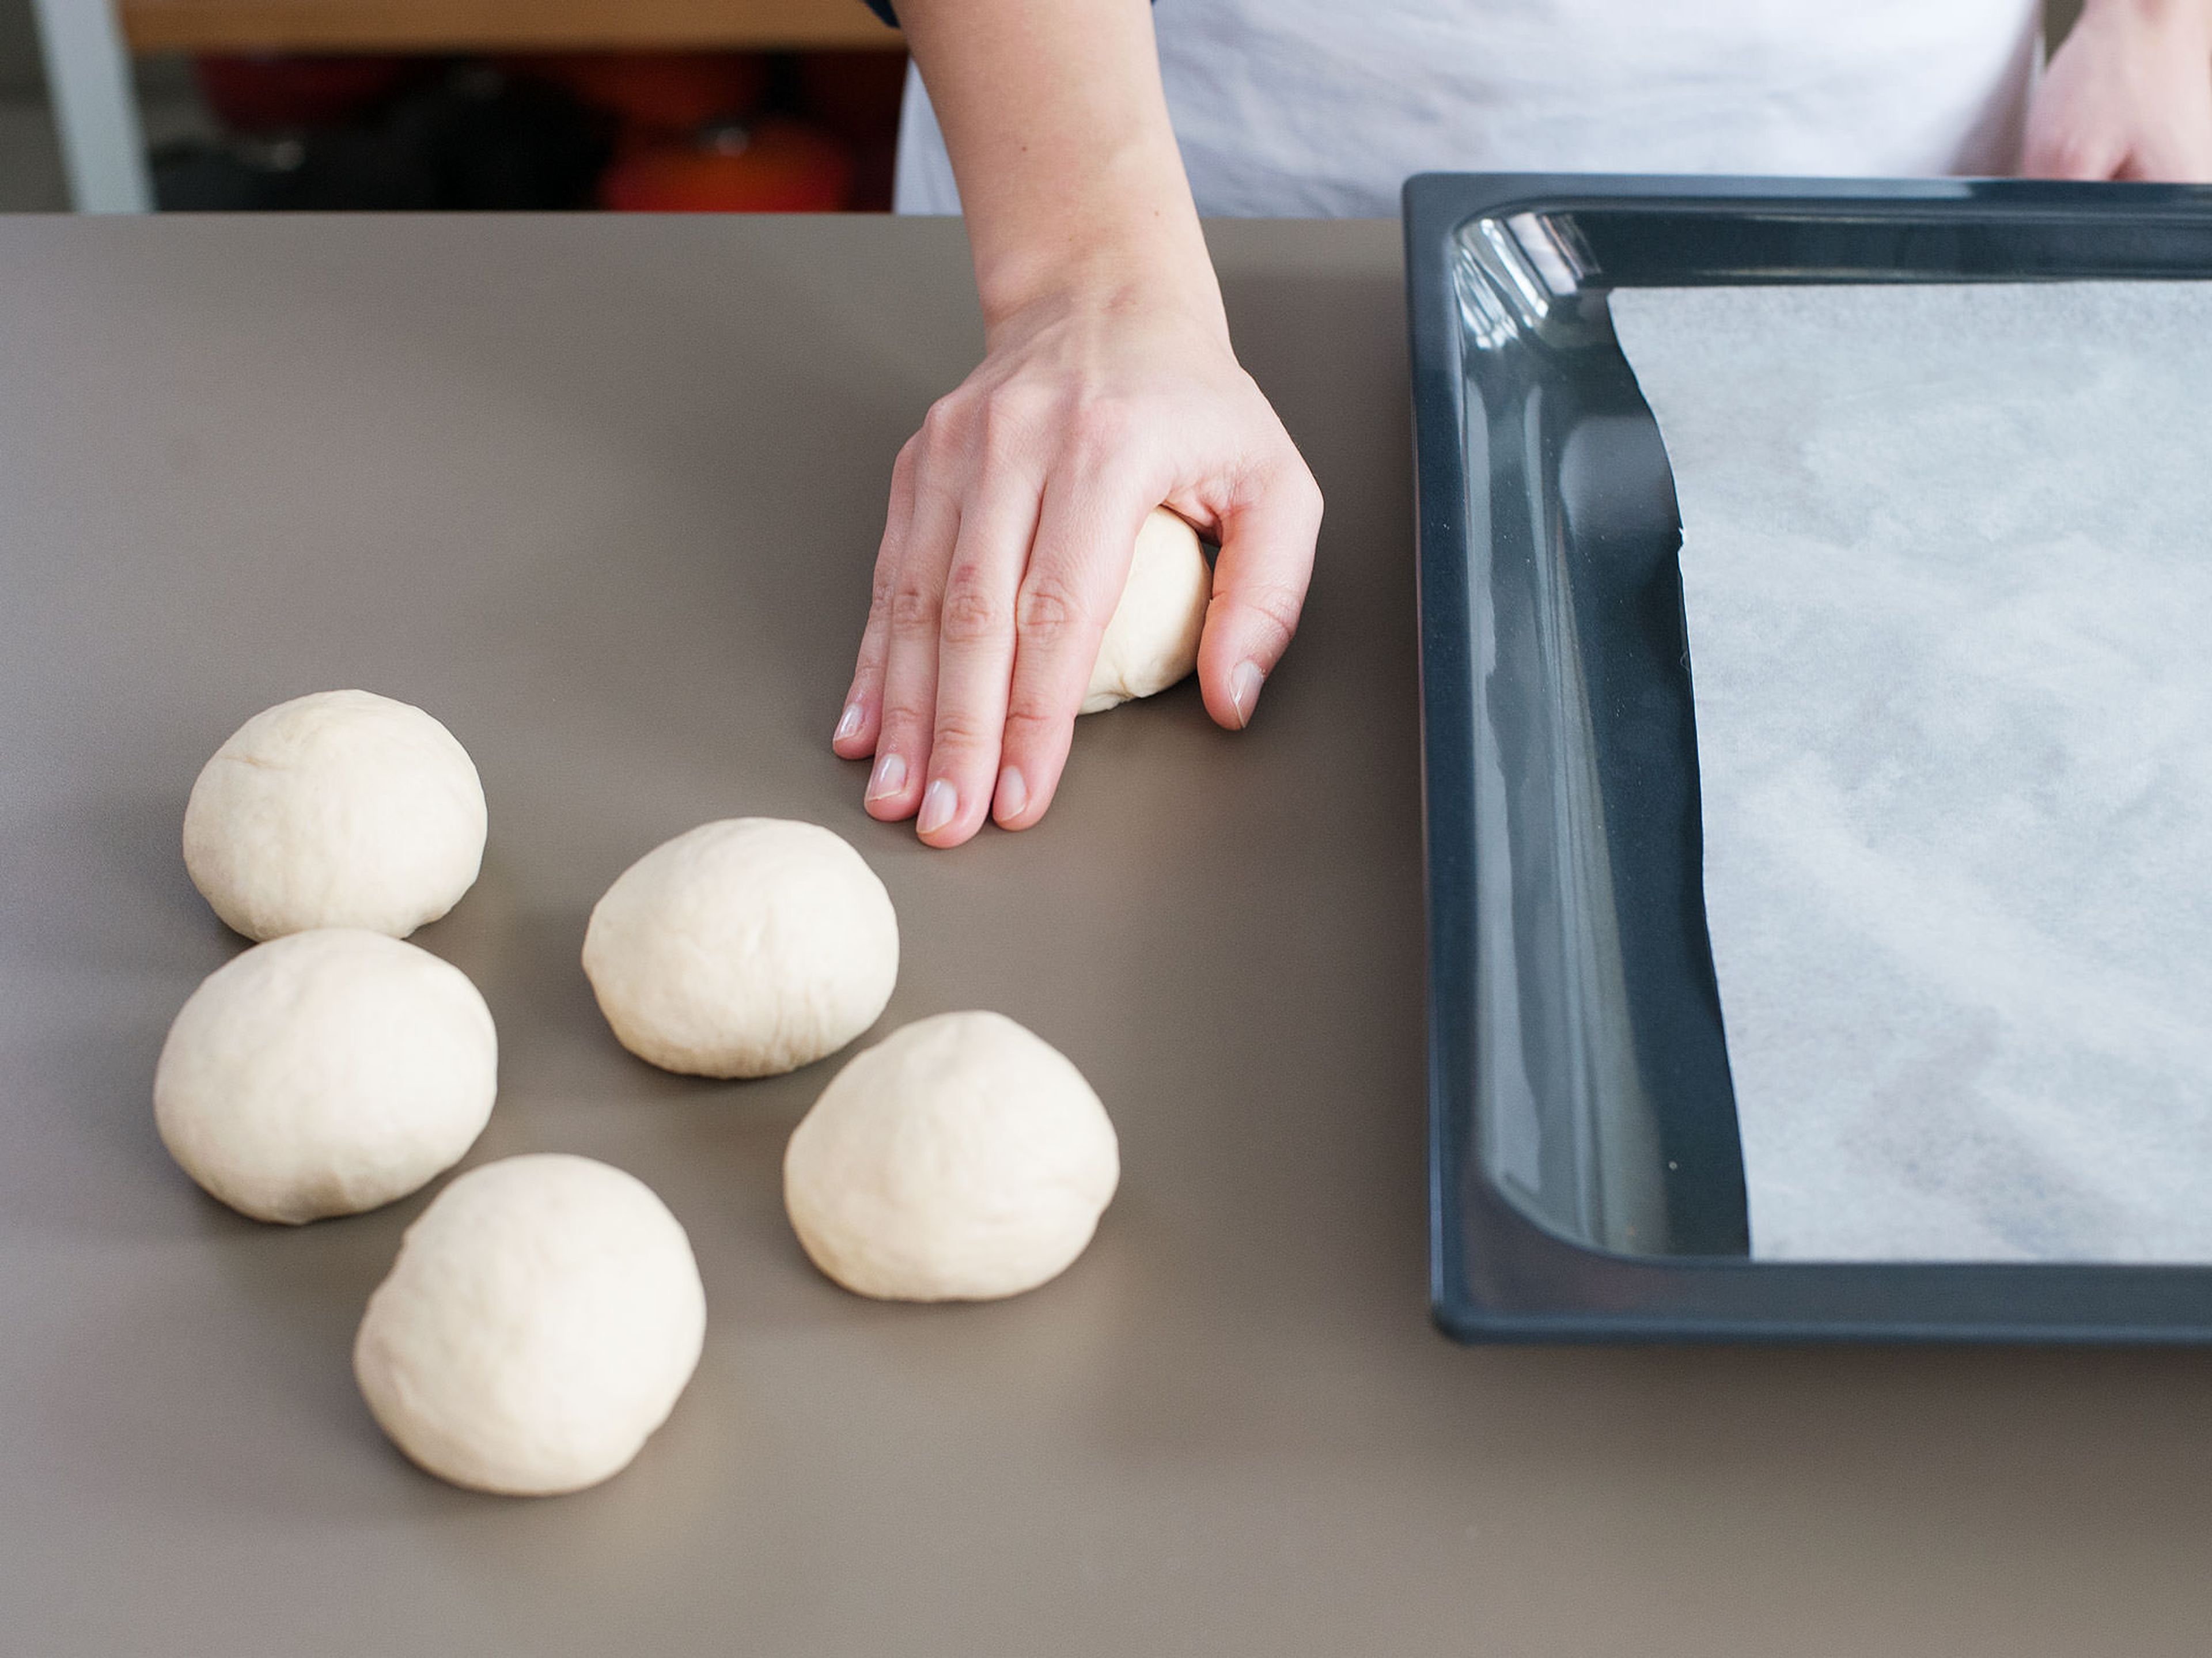 Then, roll dough pieces into smooth balls, transfer back to parchment-lined baking sheet, and cover with a damp kitchen towel. Let rise for another approx. 30 min. in a warm place.